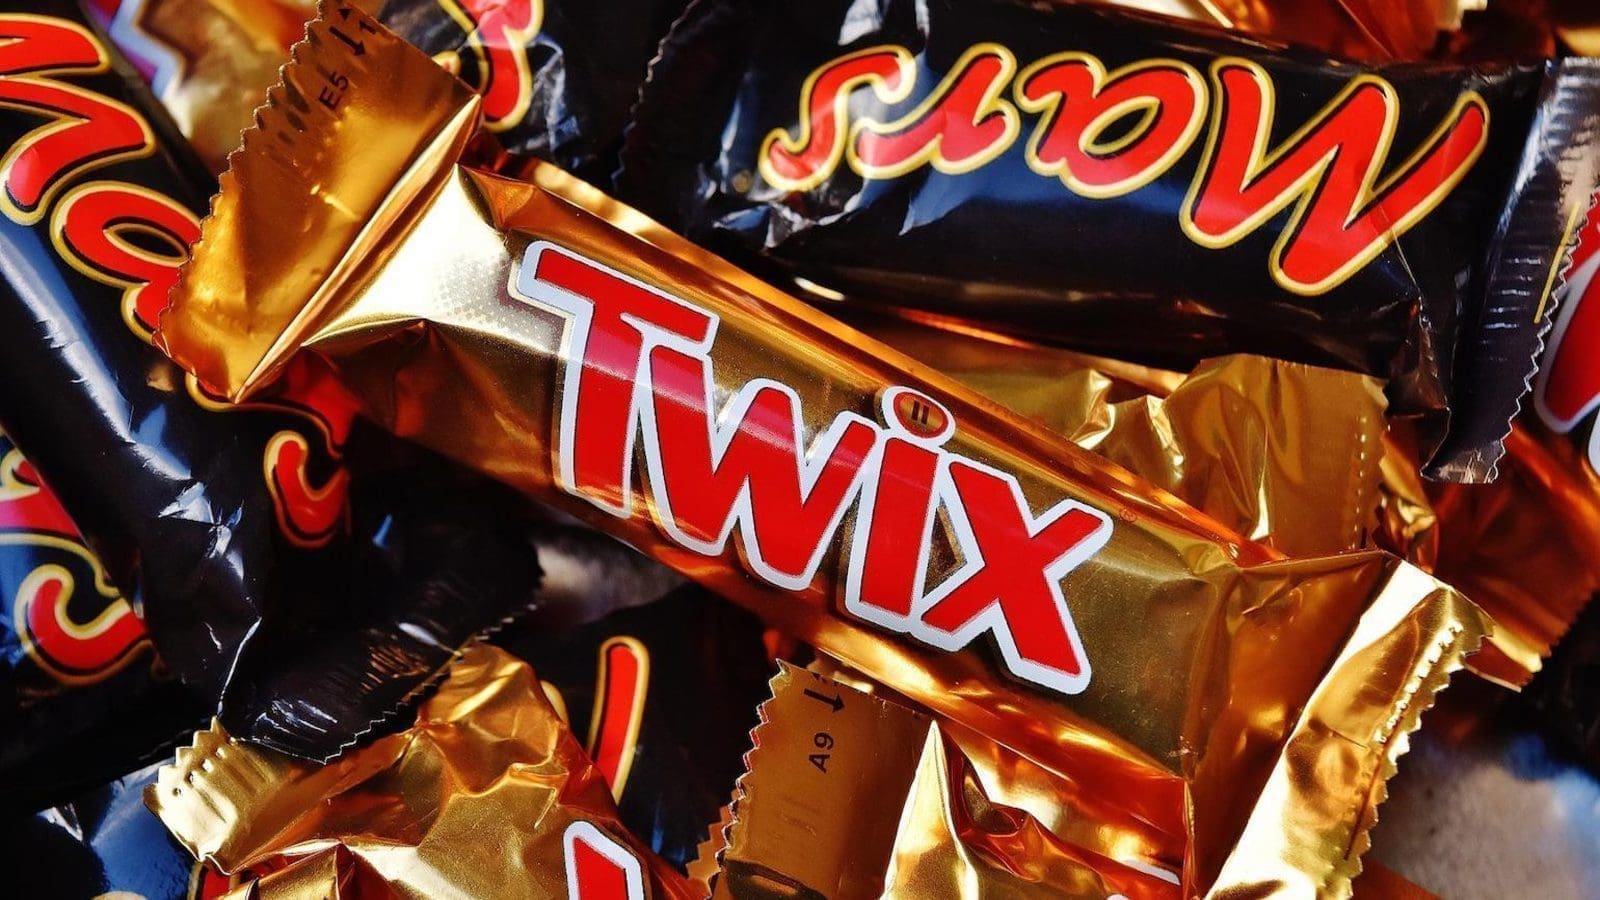 Brits face shortage of Mars bars due to production issues